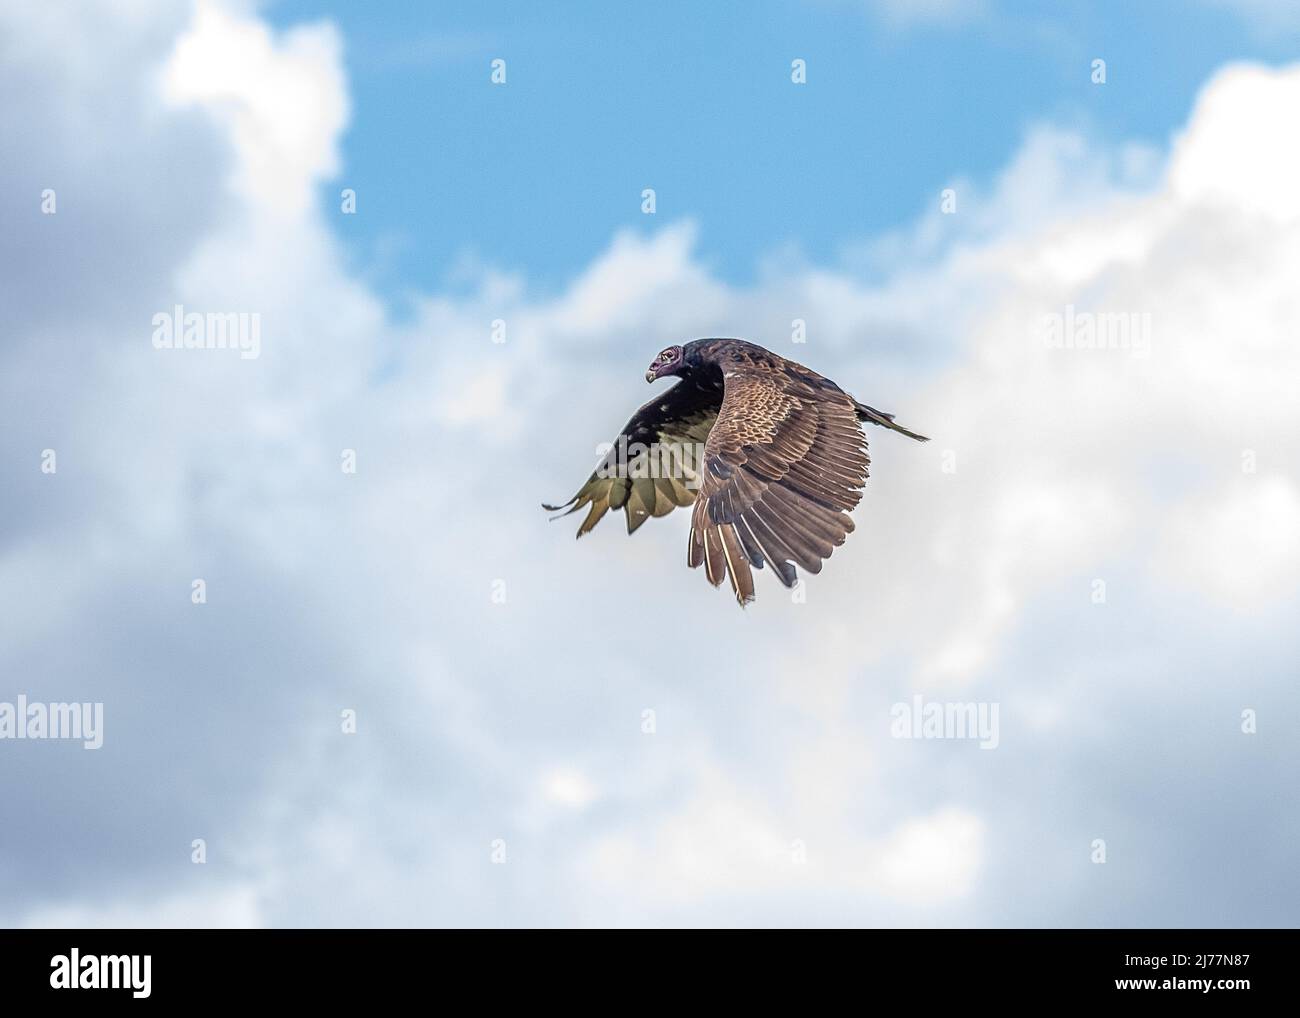 Turkey vulture swooping low over the trails at Sweetwater wetlands park Stock Photo